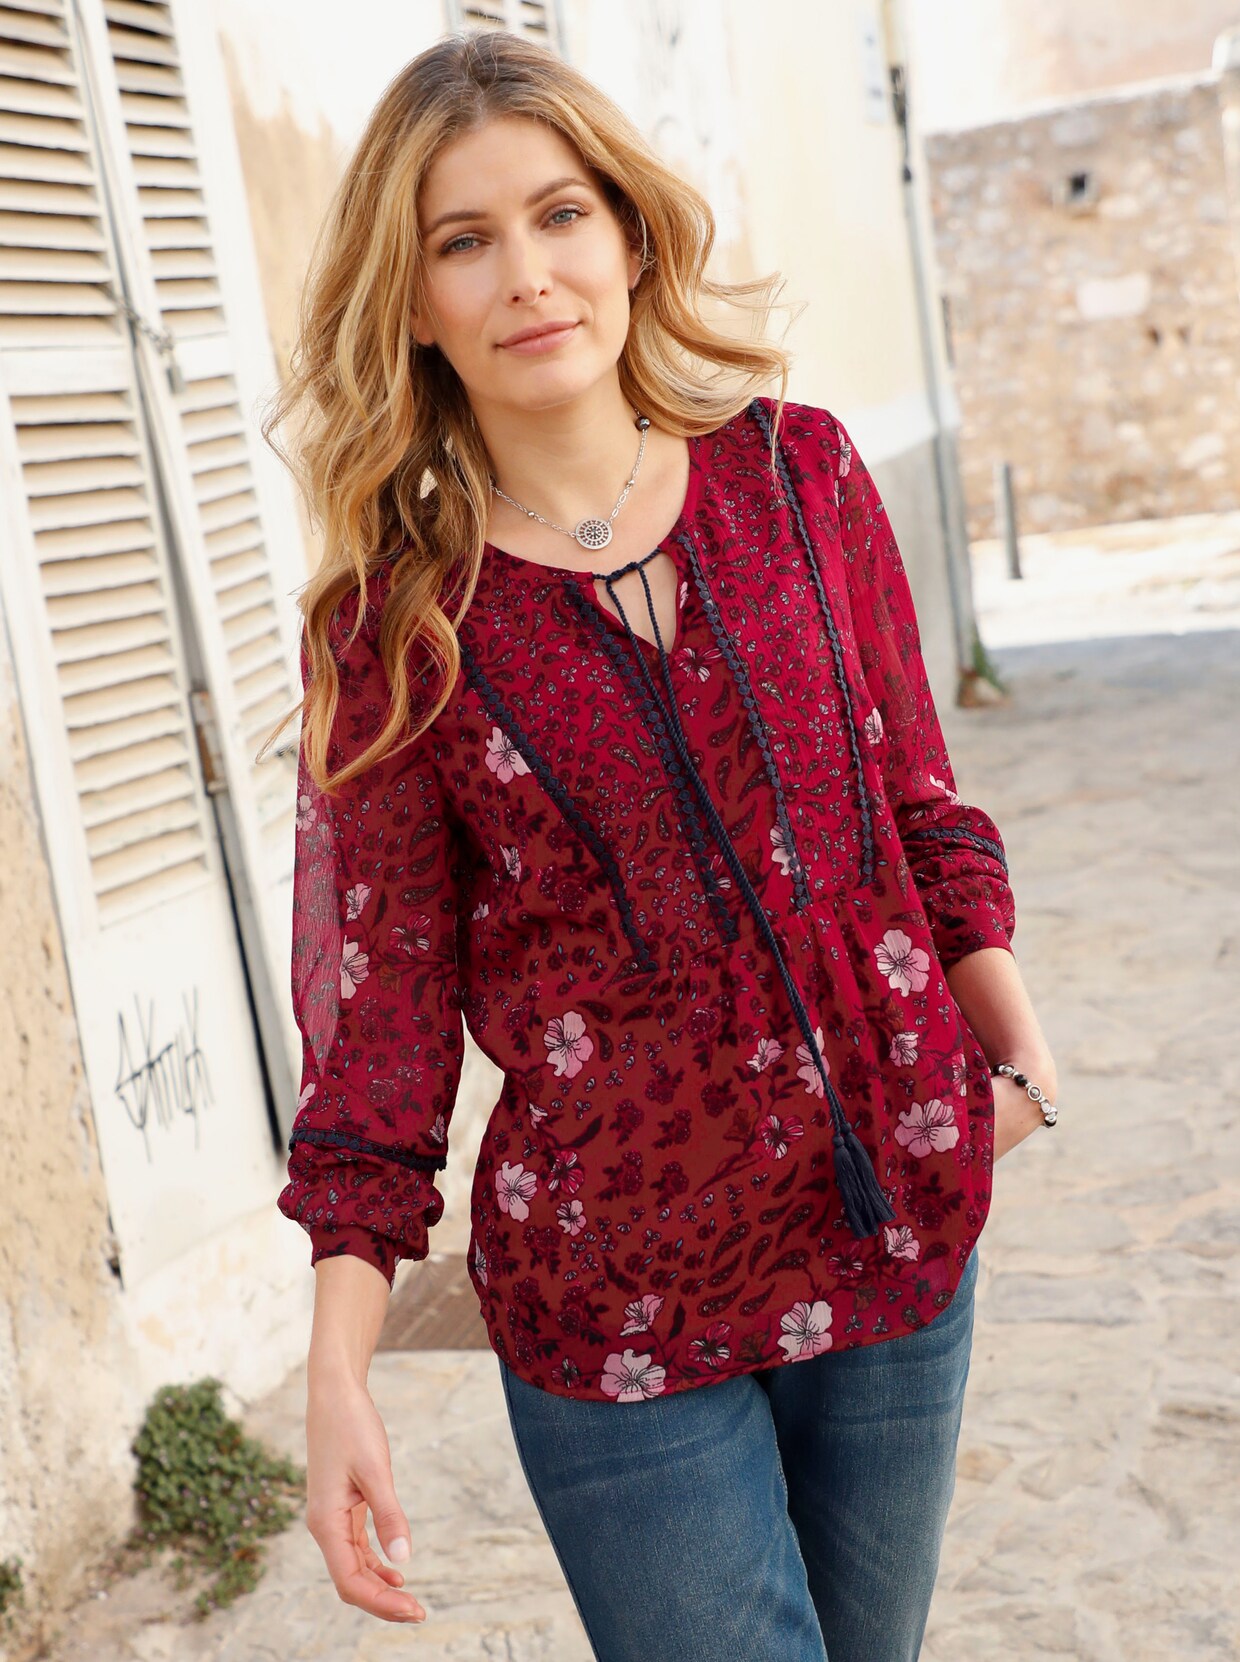 Comfortabele blouse - wijnrood geprint